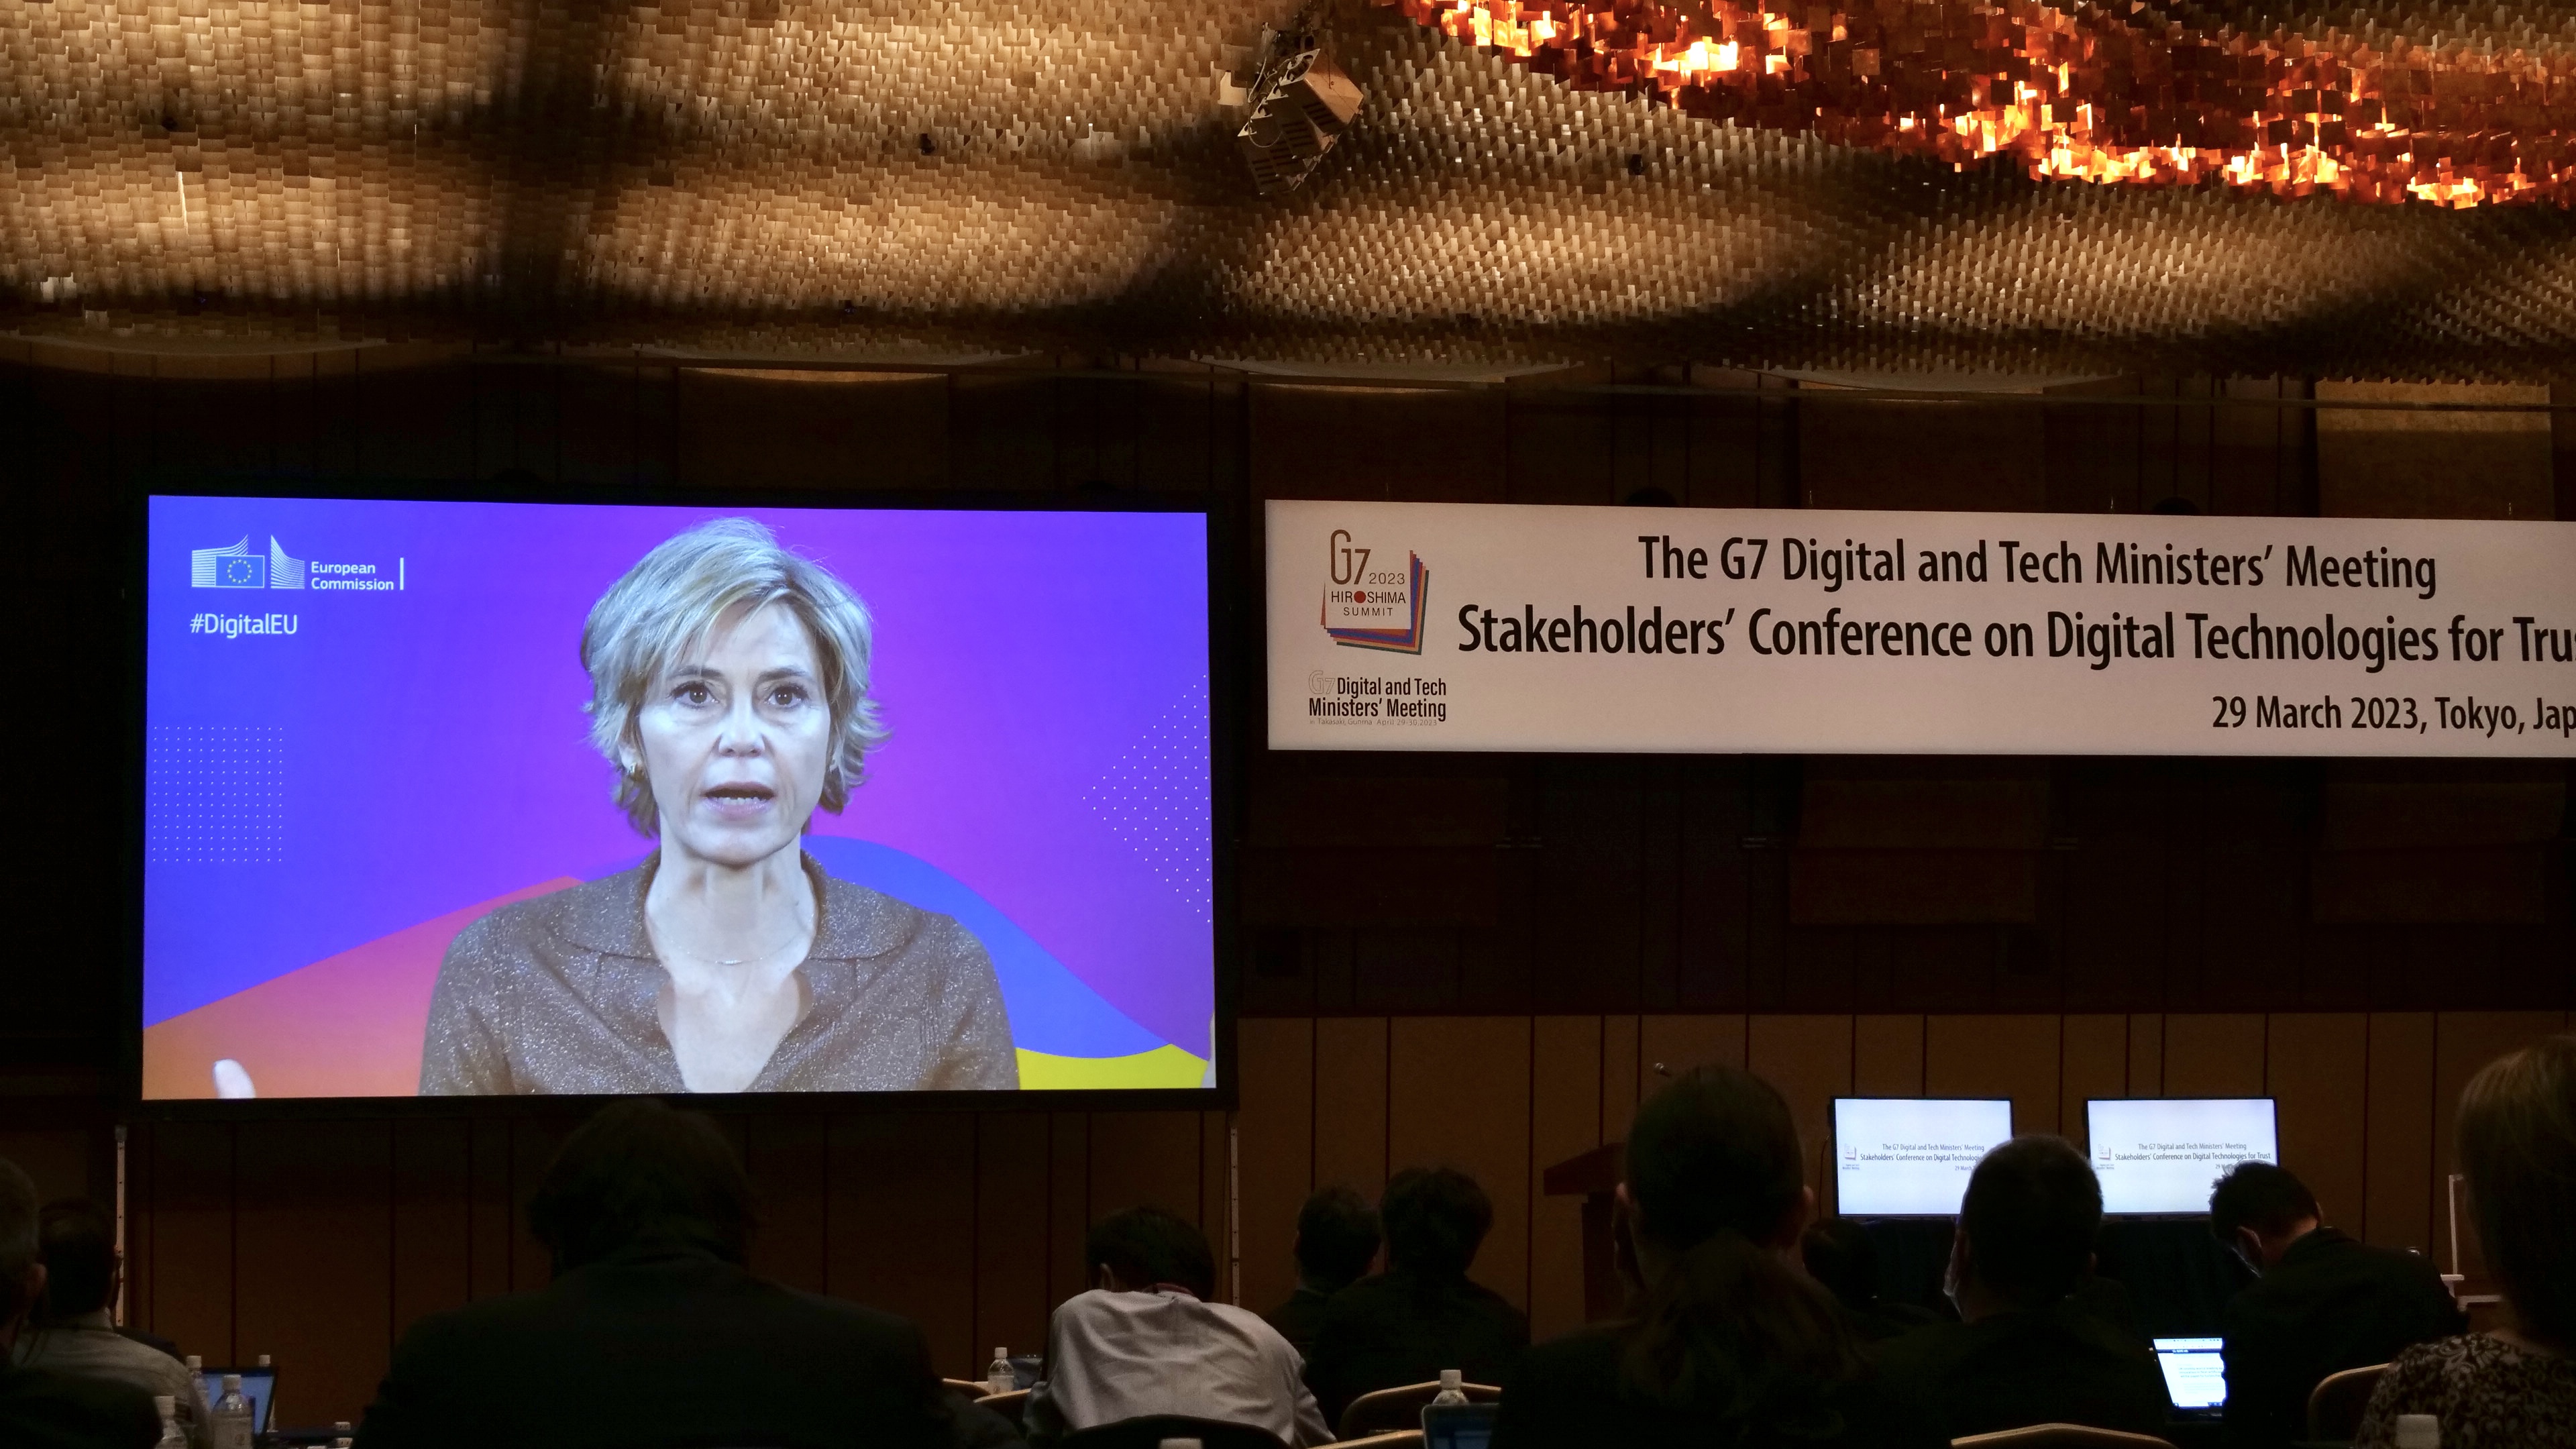 Ms. Lorena Boix Alonso, Director of Cybersecurity and Trust, European Commission, appeared in a video message.